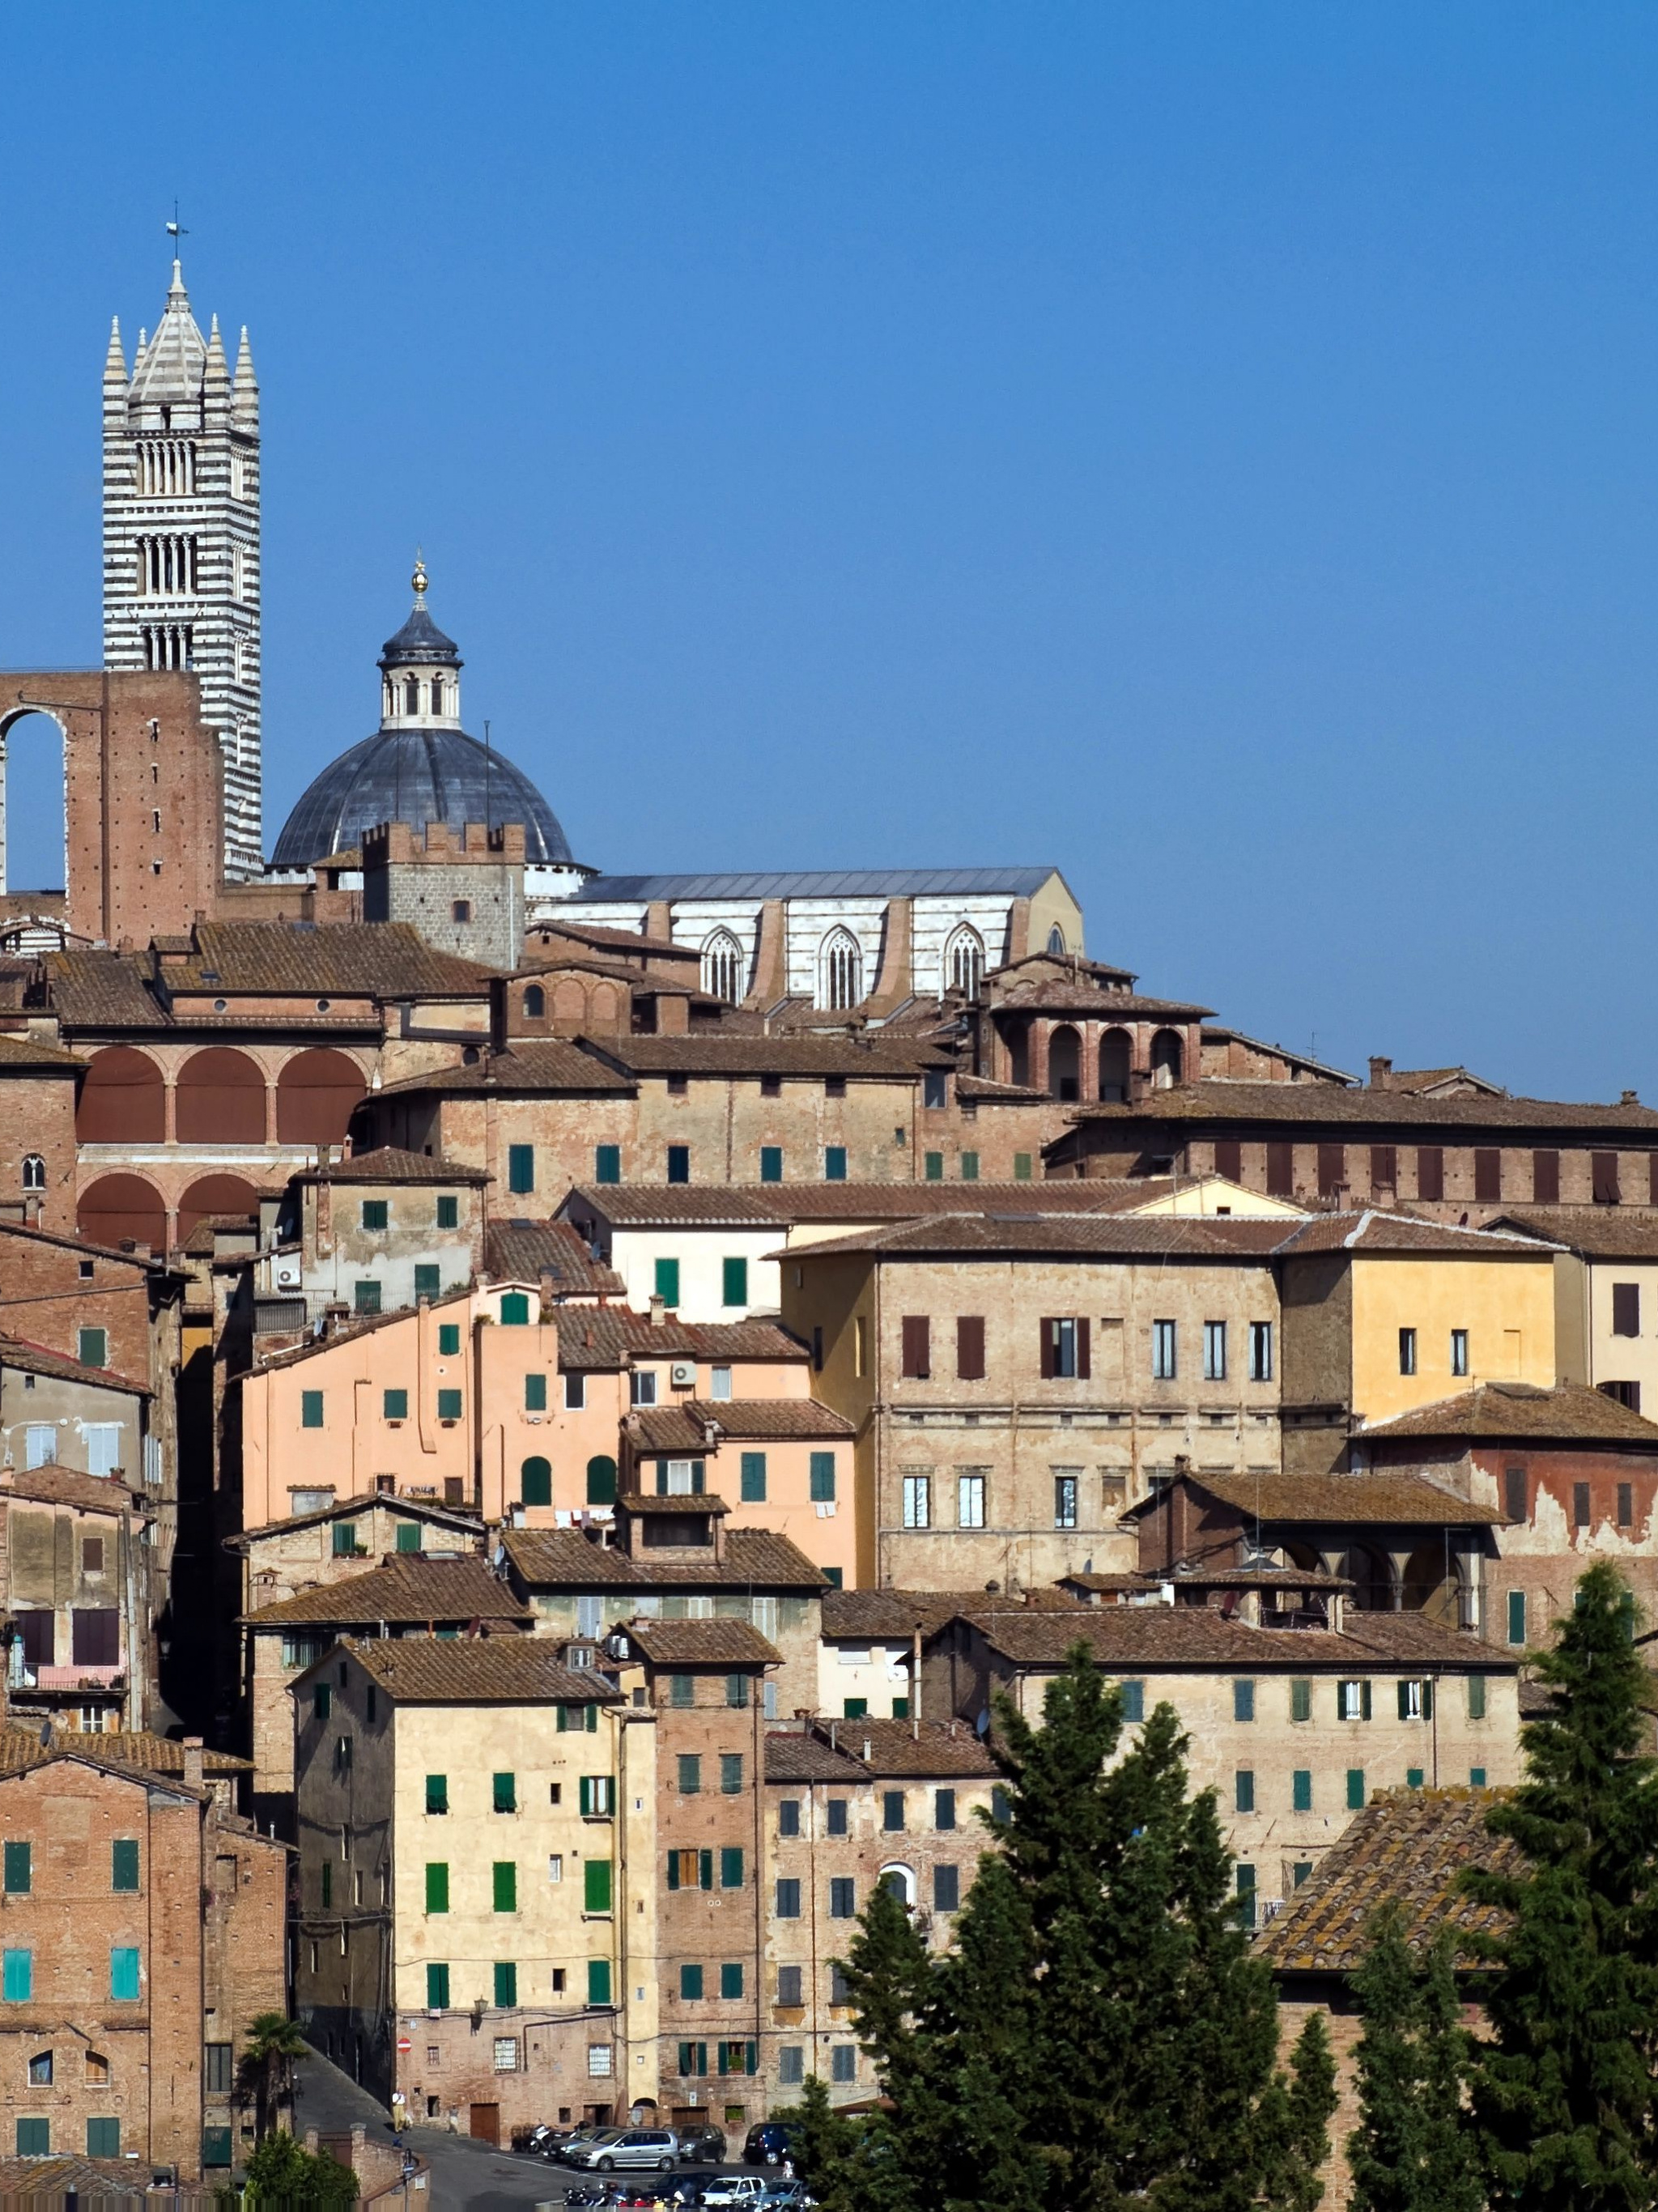 Free wallpapers Siena, Images and photos, Desktop backgrounds, Explore Siena, 2050x2740 HD Phone